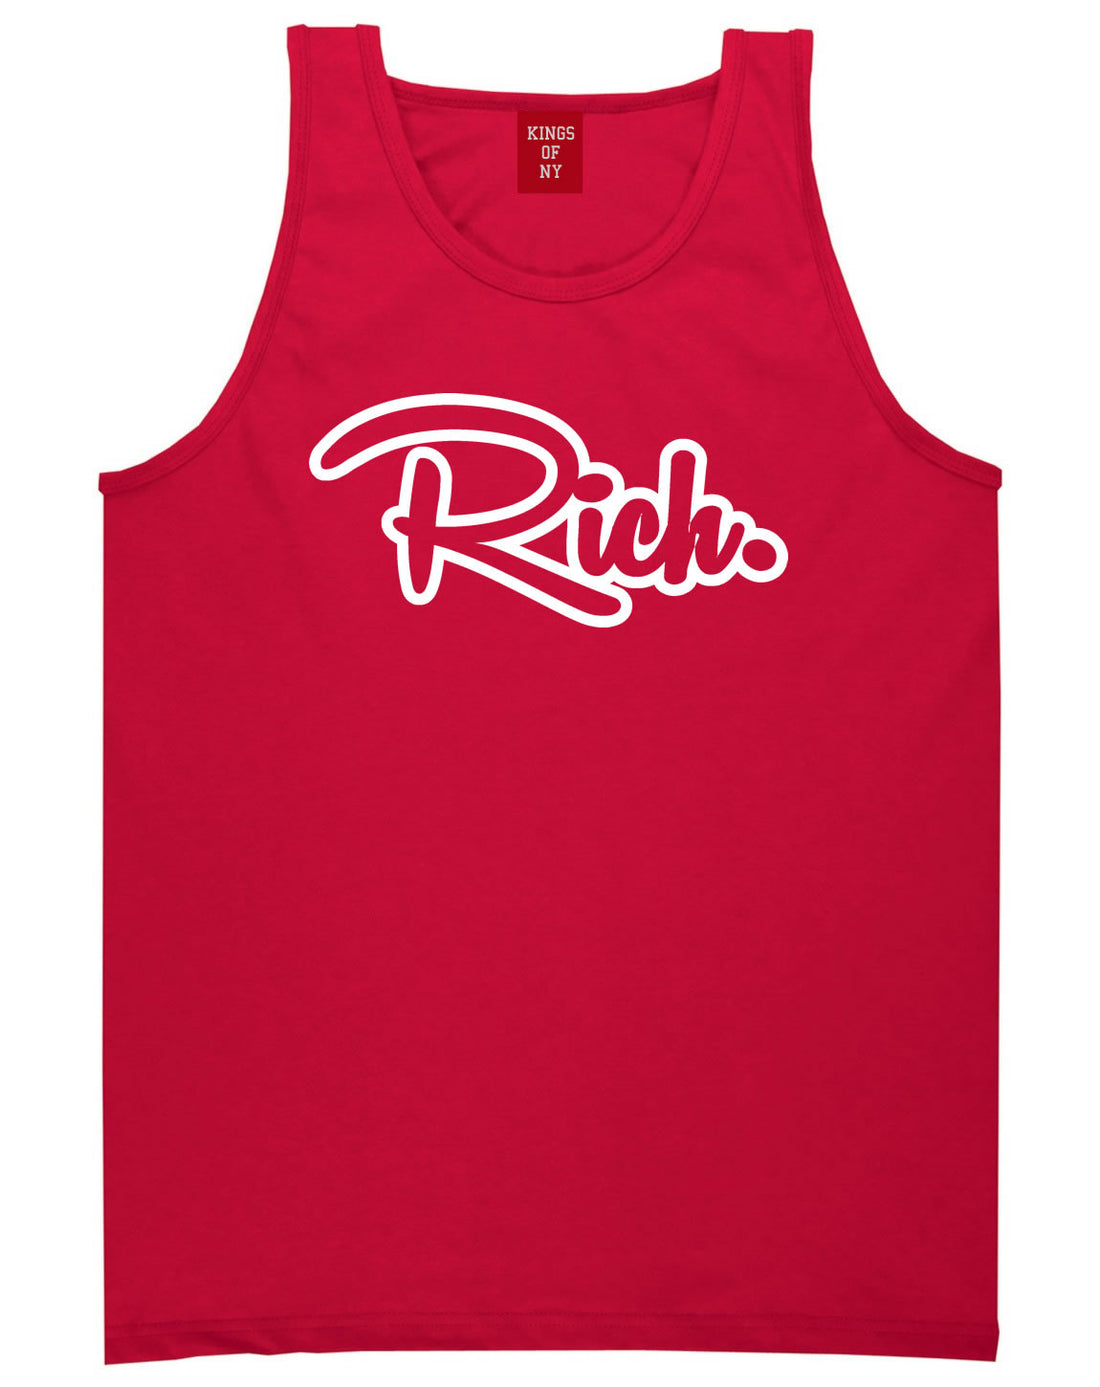 Rich Money Fab Style New York Richie NYC Tank Top In Red by Kings Of NY